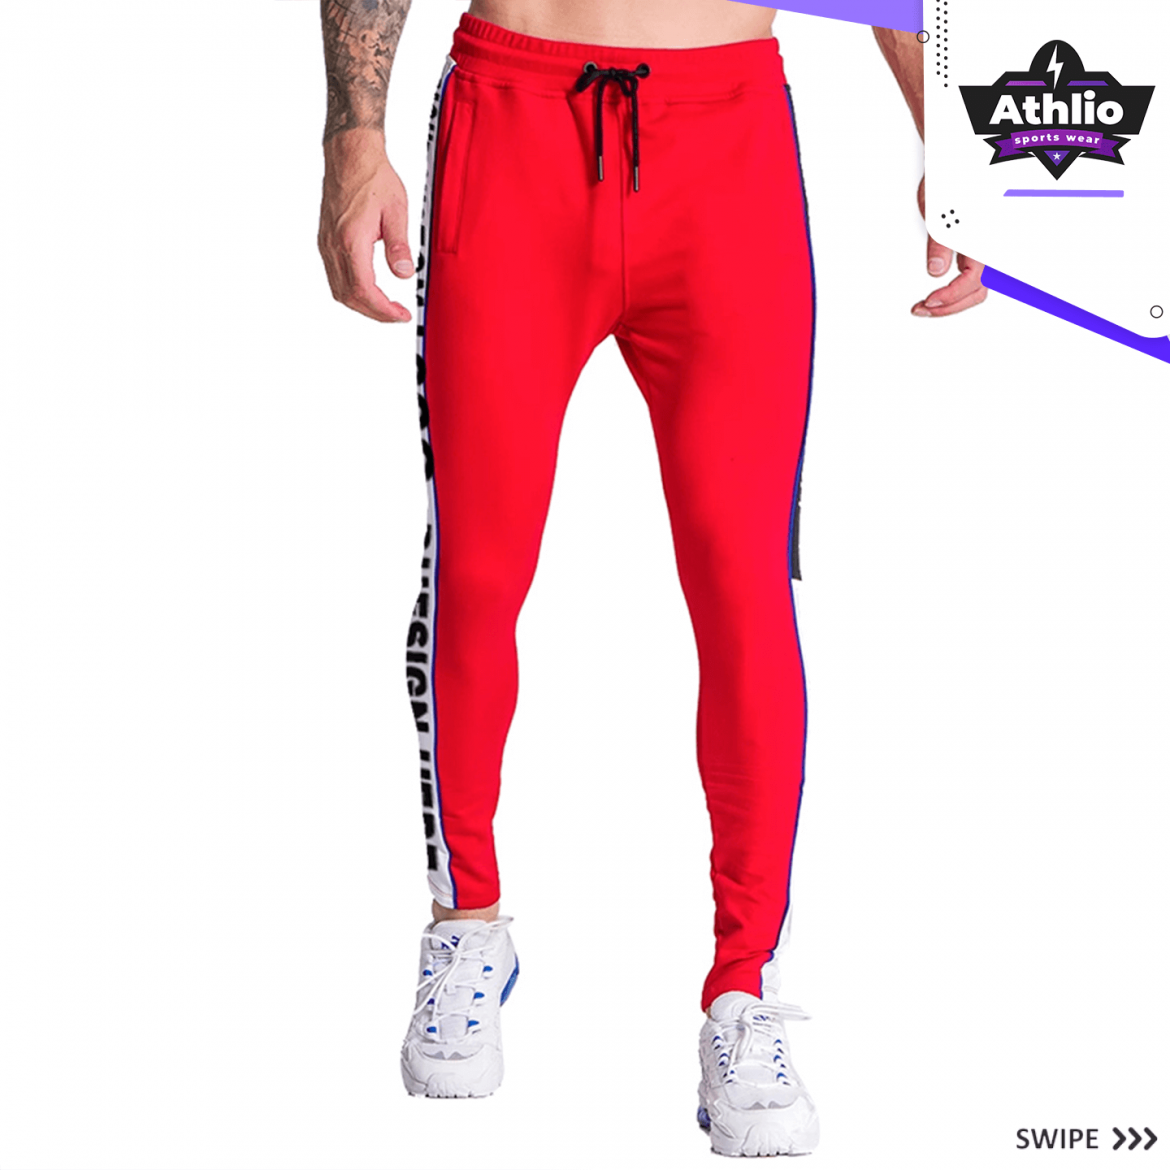 Custom Sweatpants Manufacturer from Sialkot Pakistan - Private Label